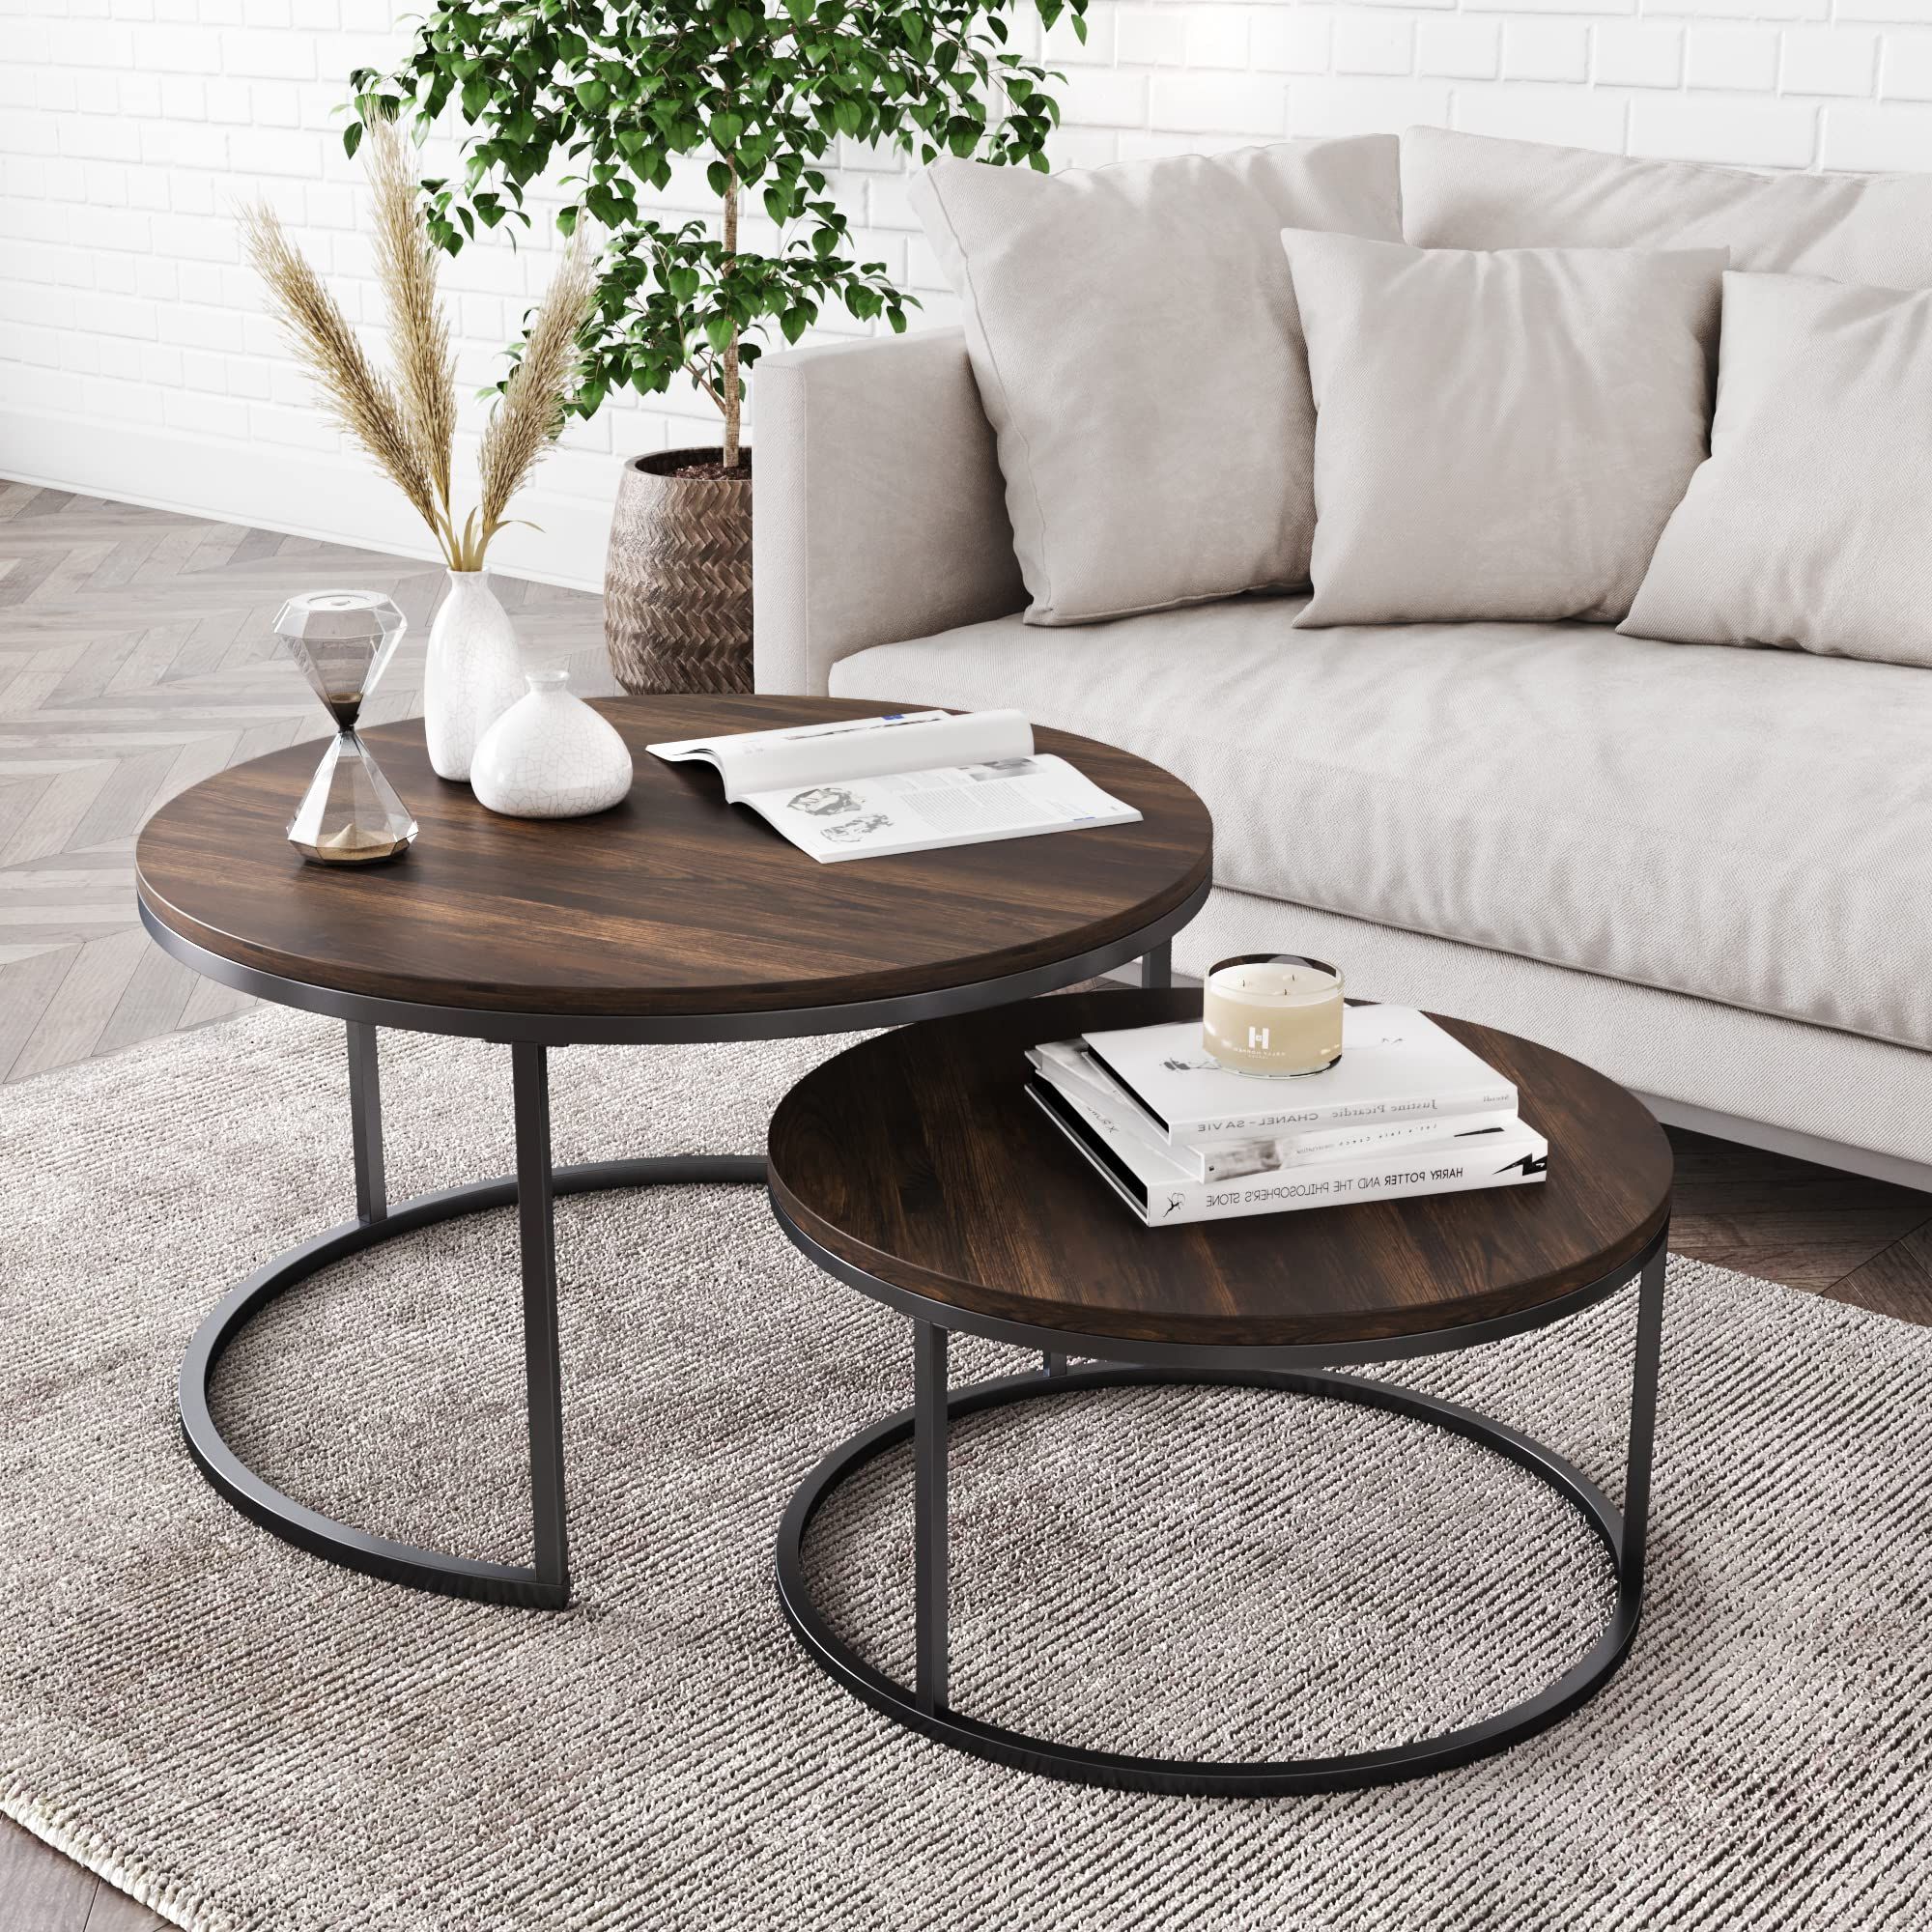 Well Known Modern Nesting Coffee Tables Within Amazon: Nathan James Stella Round Modern Nesting Coffee Set Of 2,  Stacking Living Room Accent Tables With An Industrial Wood Finish And  Powder Coated Metal Frame, Warm Nutmeg/matte Black : Home & (Photo 3 of 10)